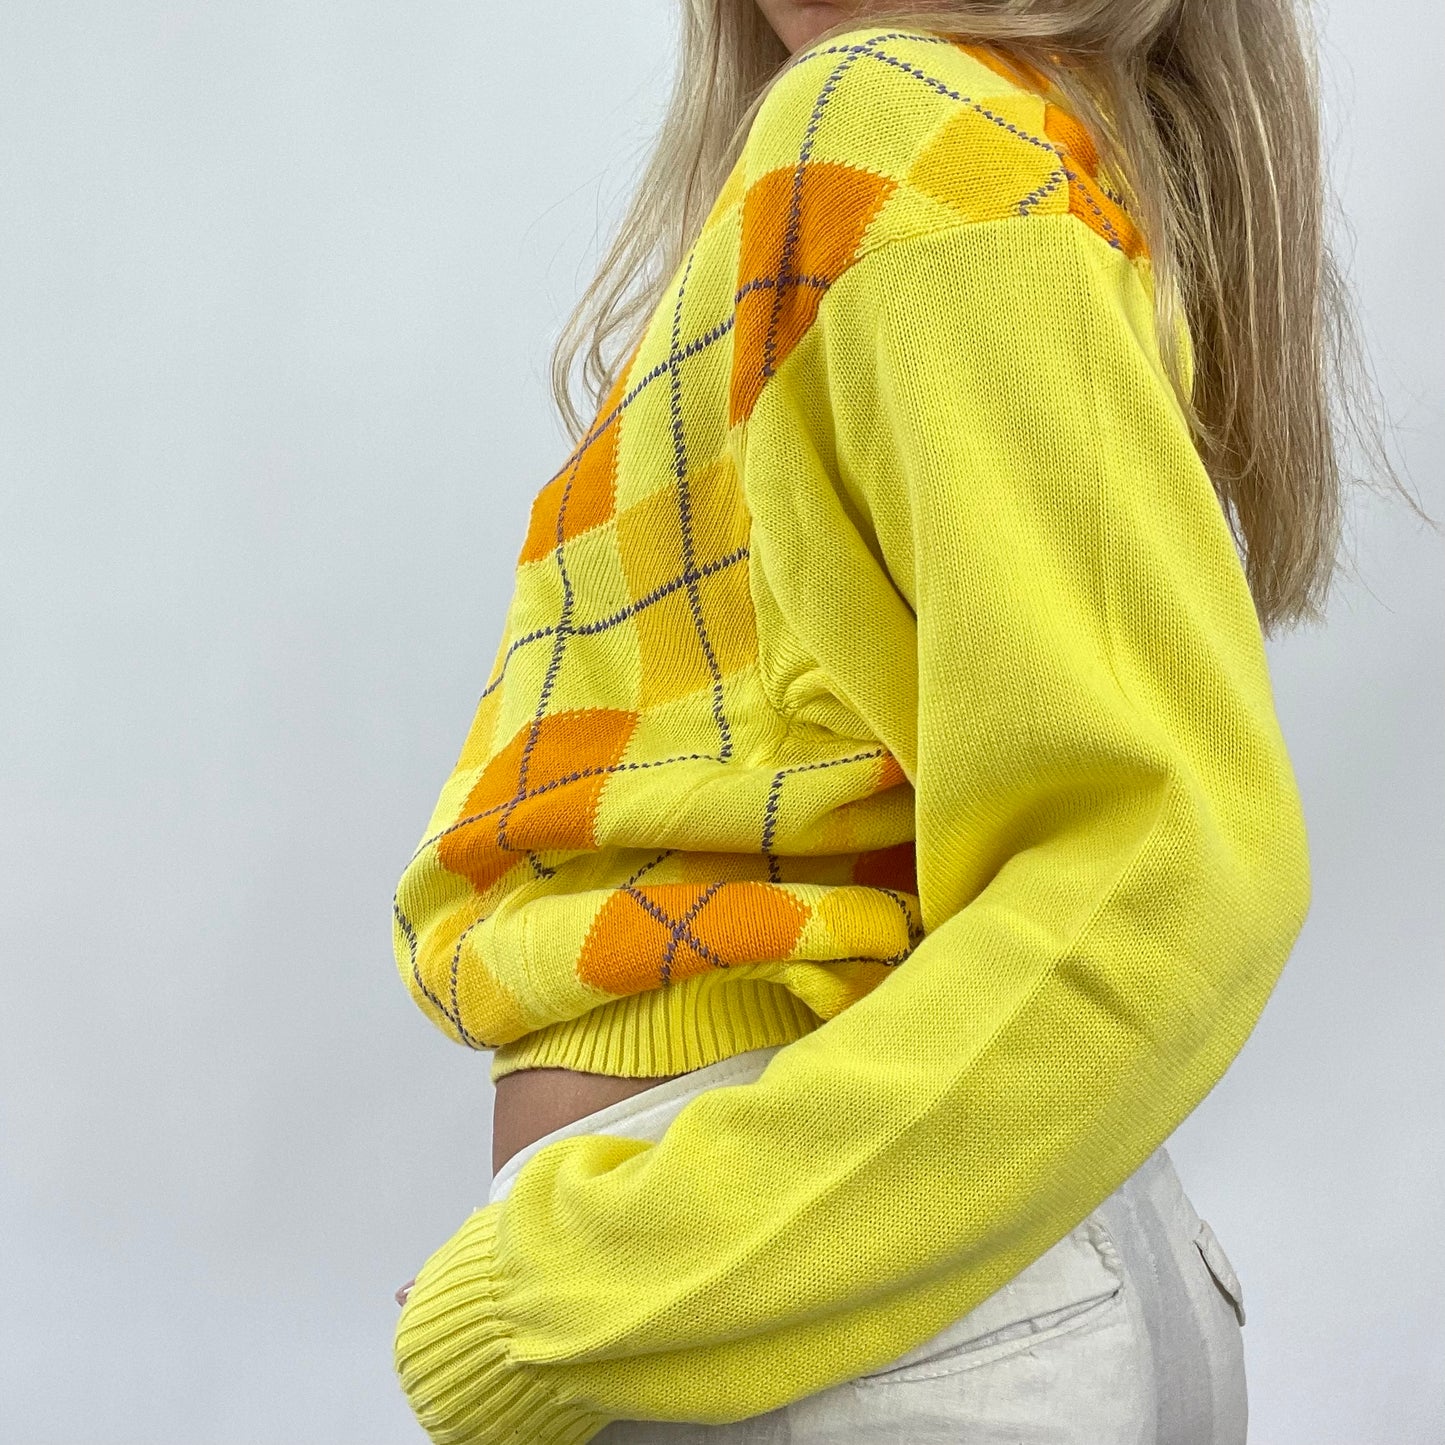 FRESHERS FITS DROP | small yellow argyle button up cardigan